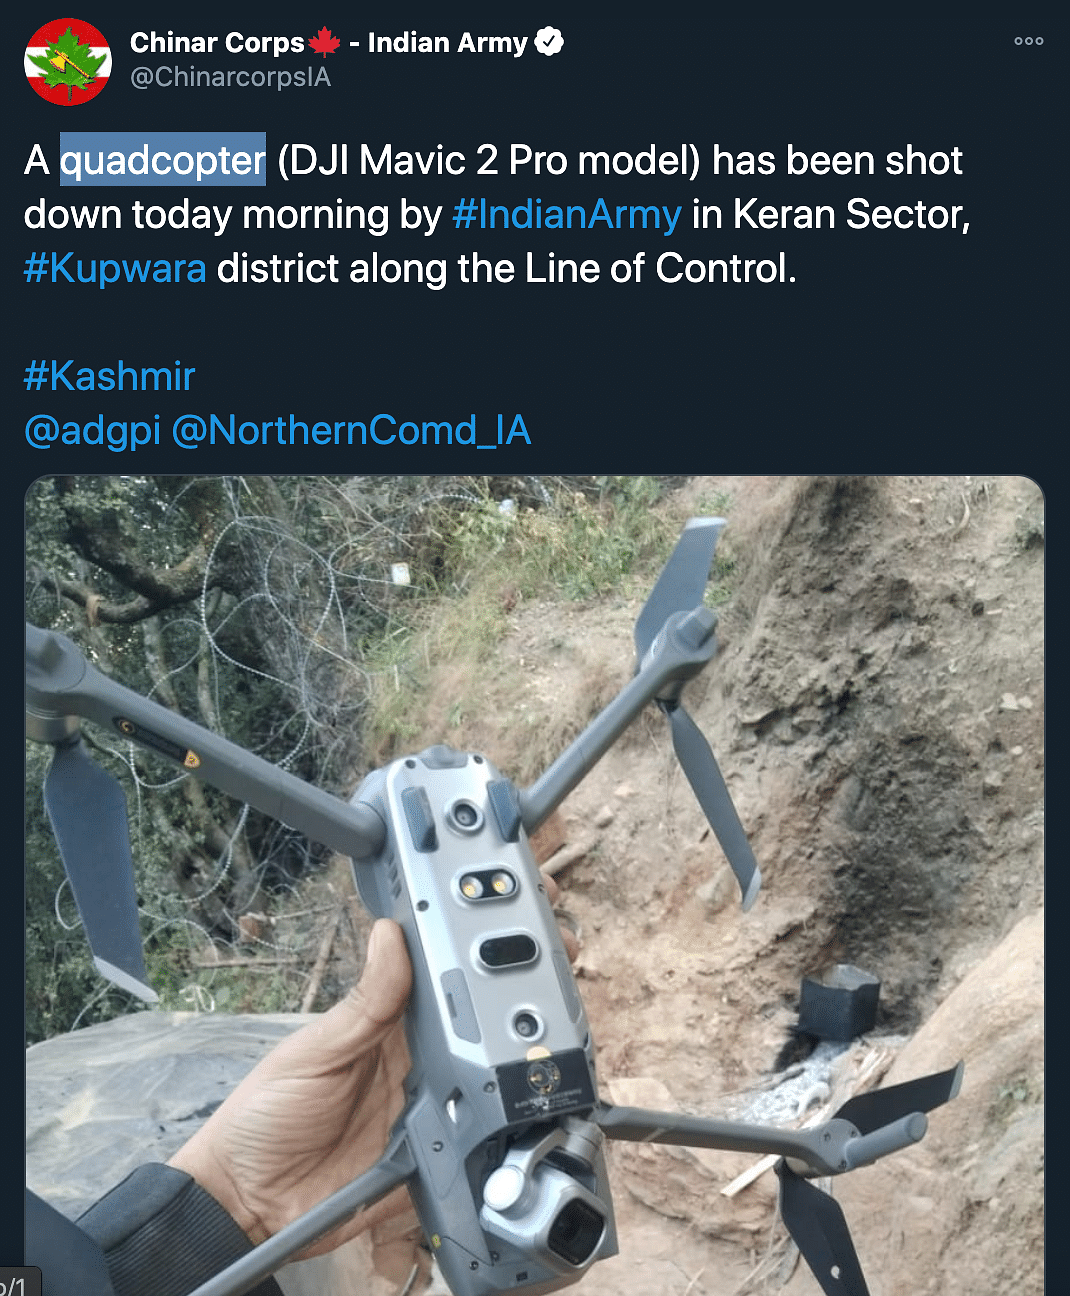 The quadcopter is a DJI Mavic 2 Pro model, the official account of the Chinar Corps tweeted.